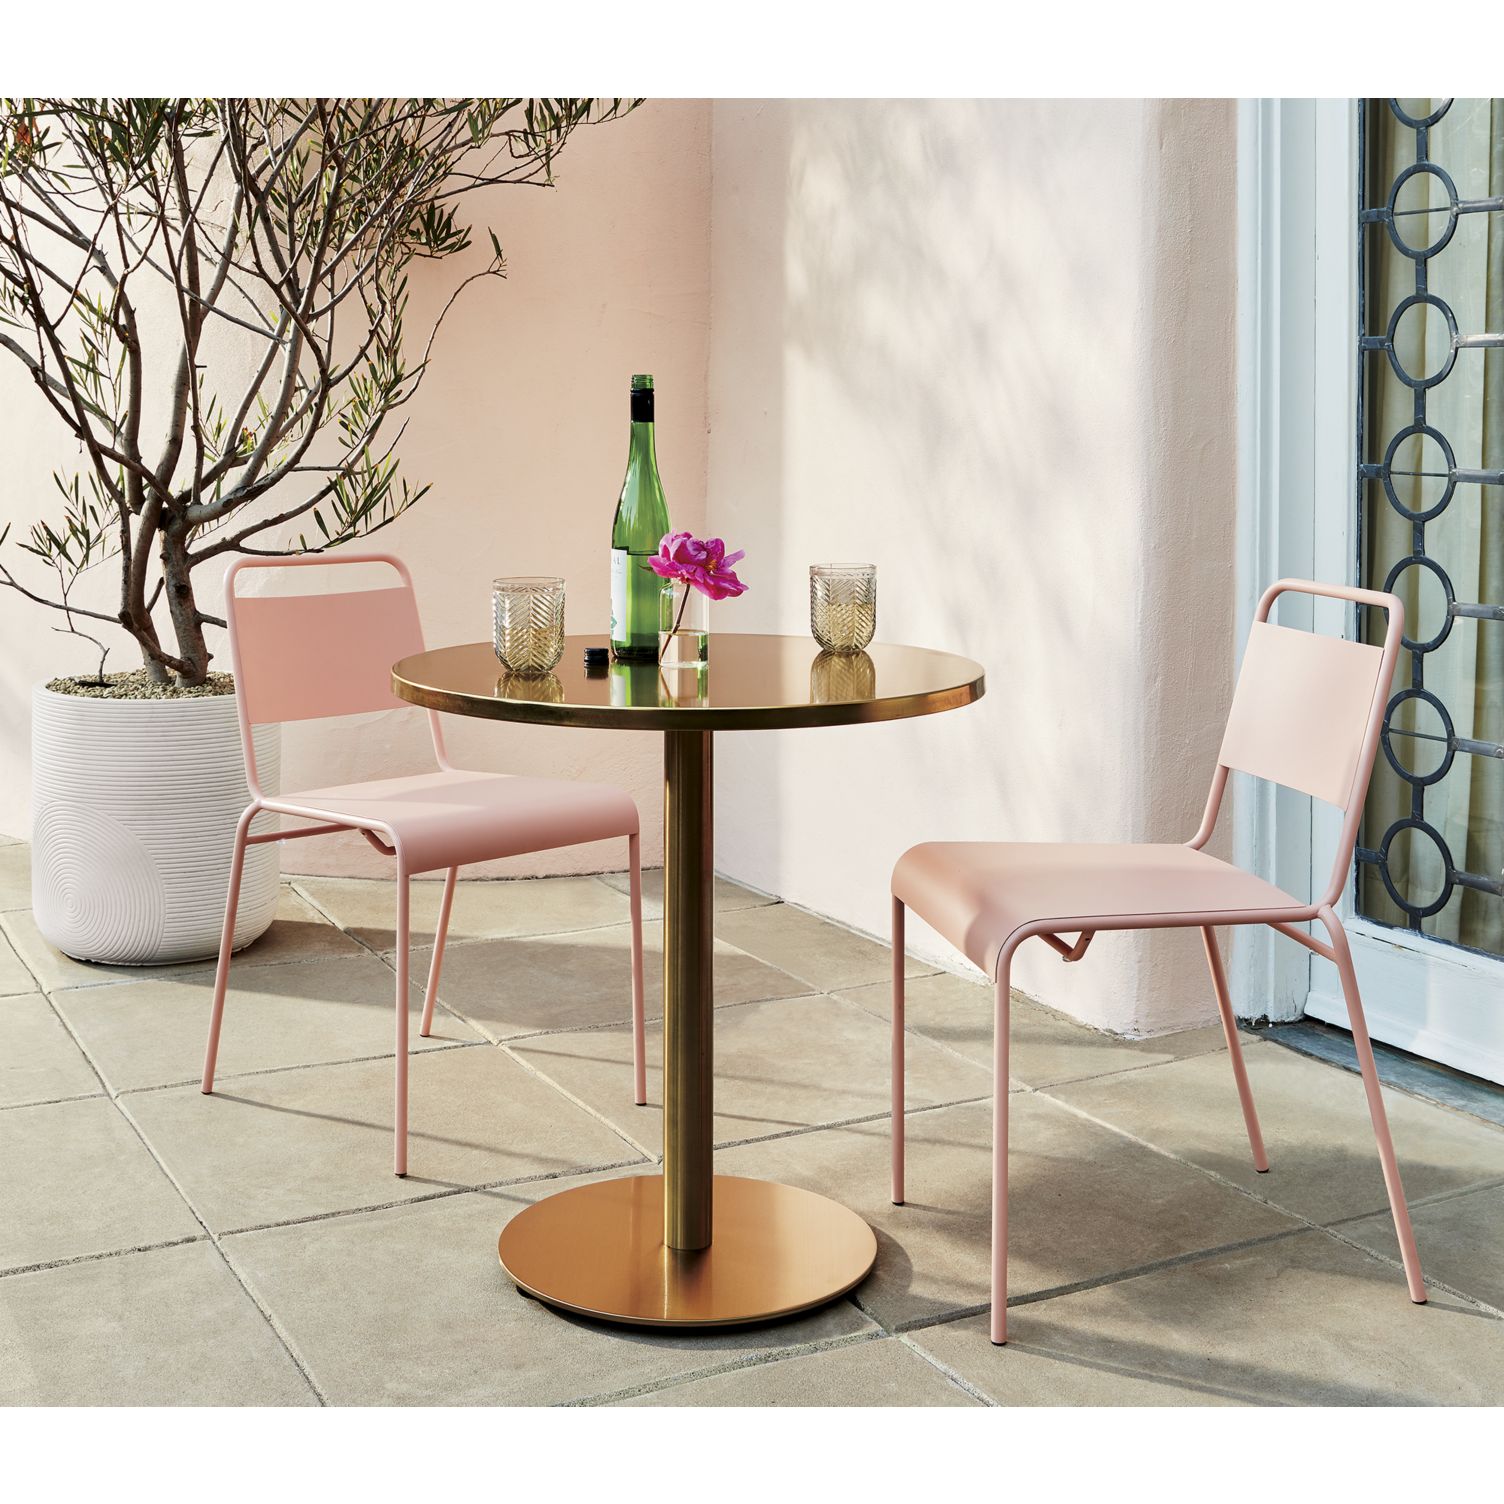 Outdoor chairs in a shade of blush